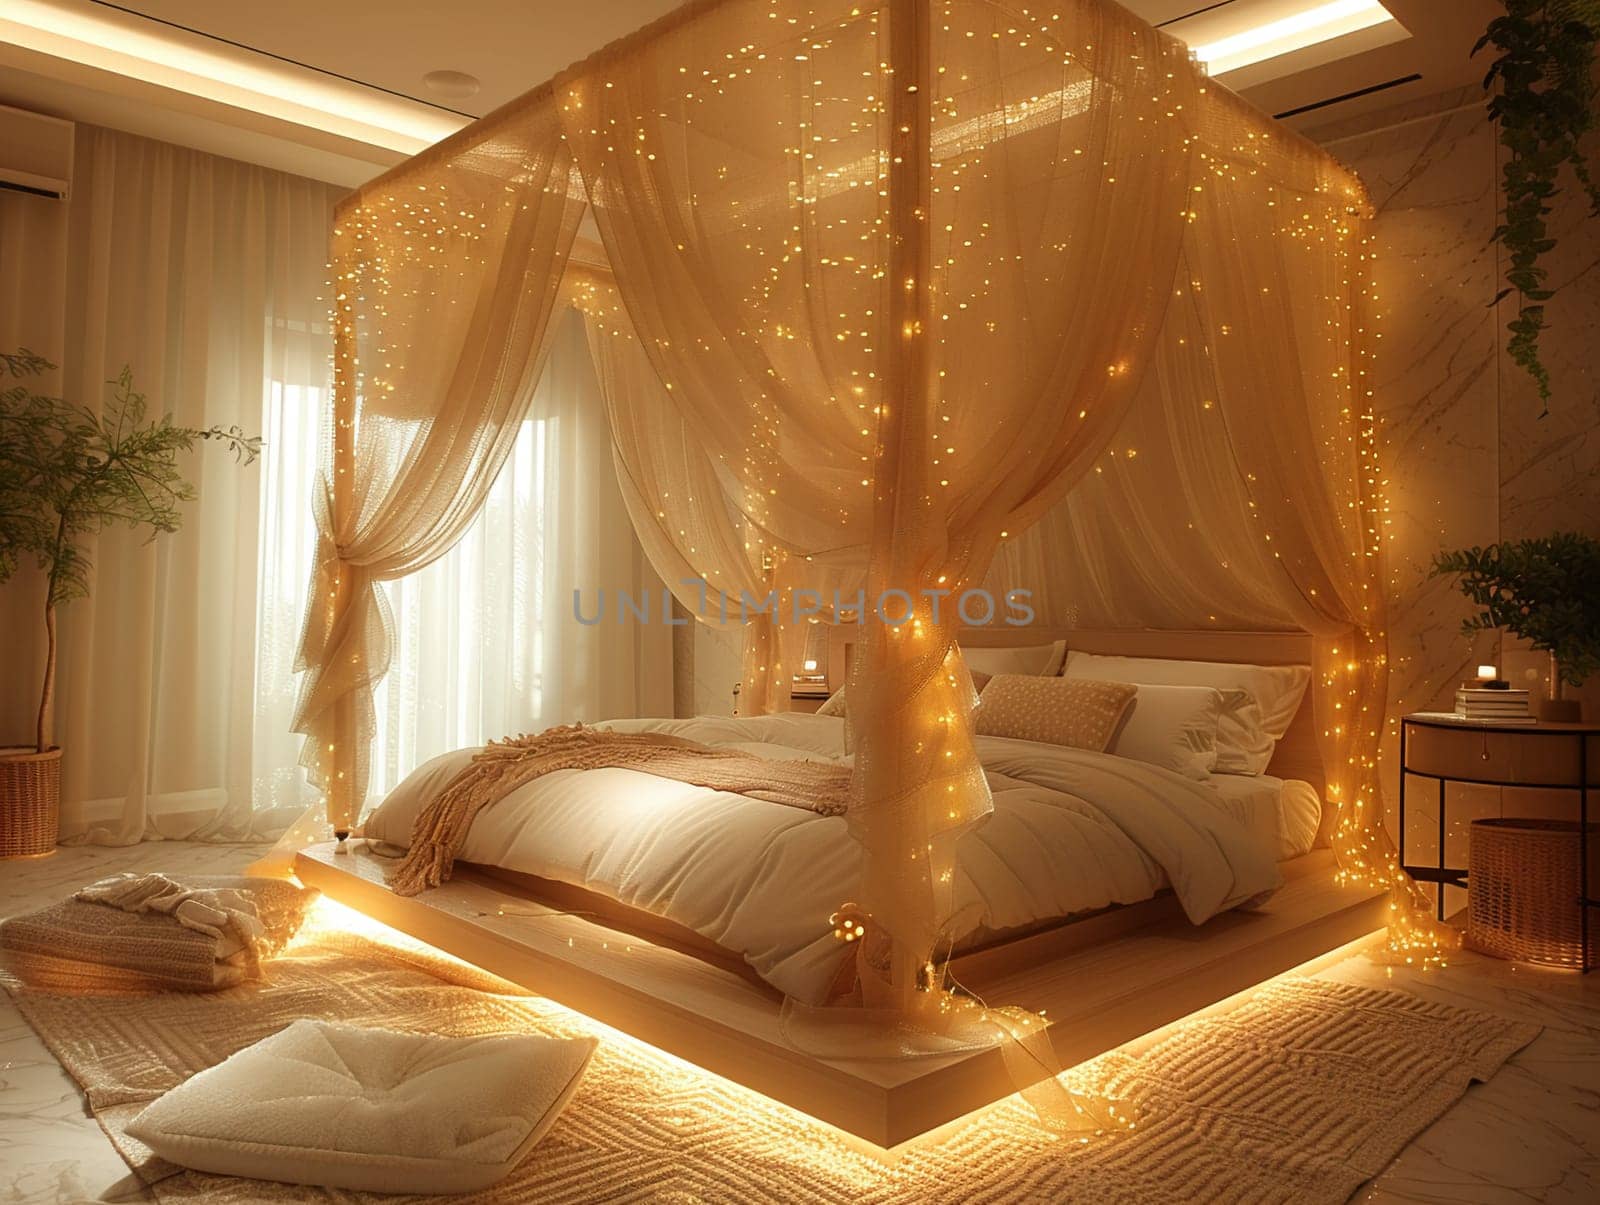 Romantic bedroom with soft lighting, sheer curtains, and a four-poster bed